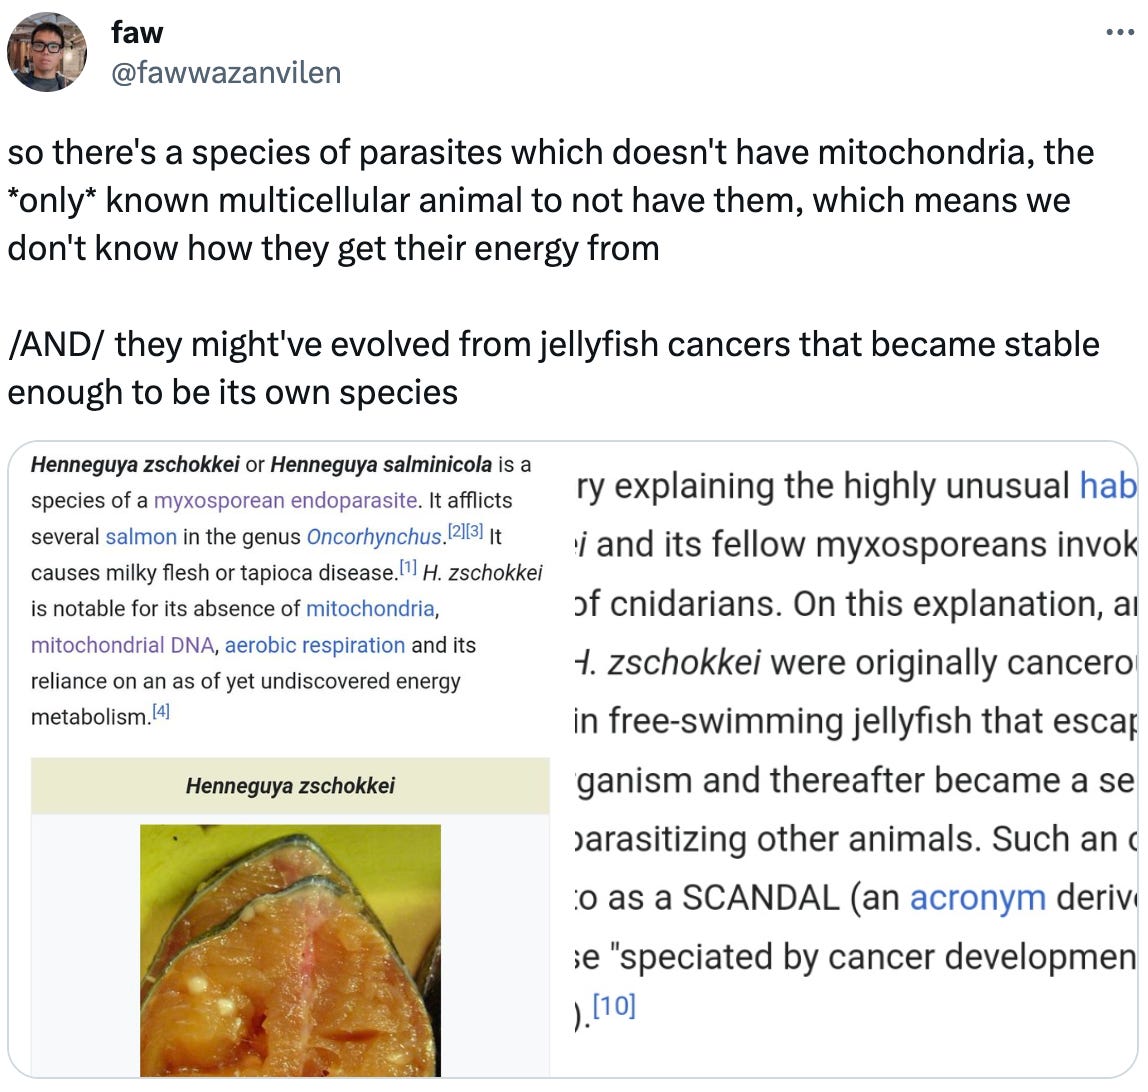  faw @fawwazanvilen so there's a species of parasites which doesn't have mitochondria, the *only* known multicellular animal to not have them, which means we don't know how they get their energy from  /AND/ they might've evolved from jellyfish cancers that became stable enough to be its own species